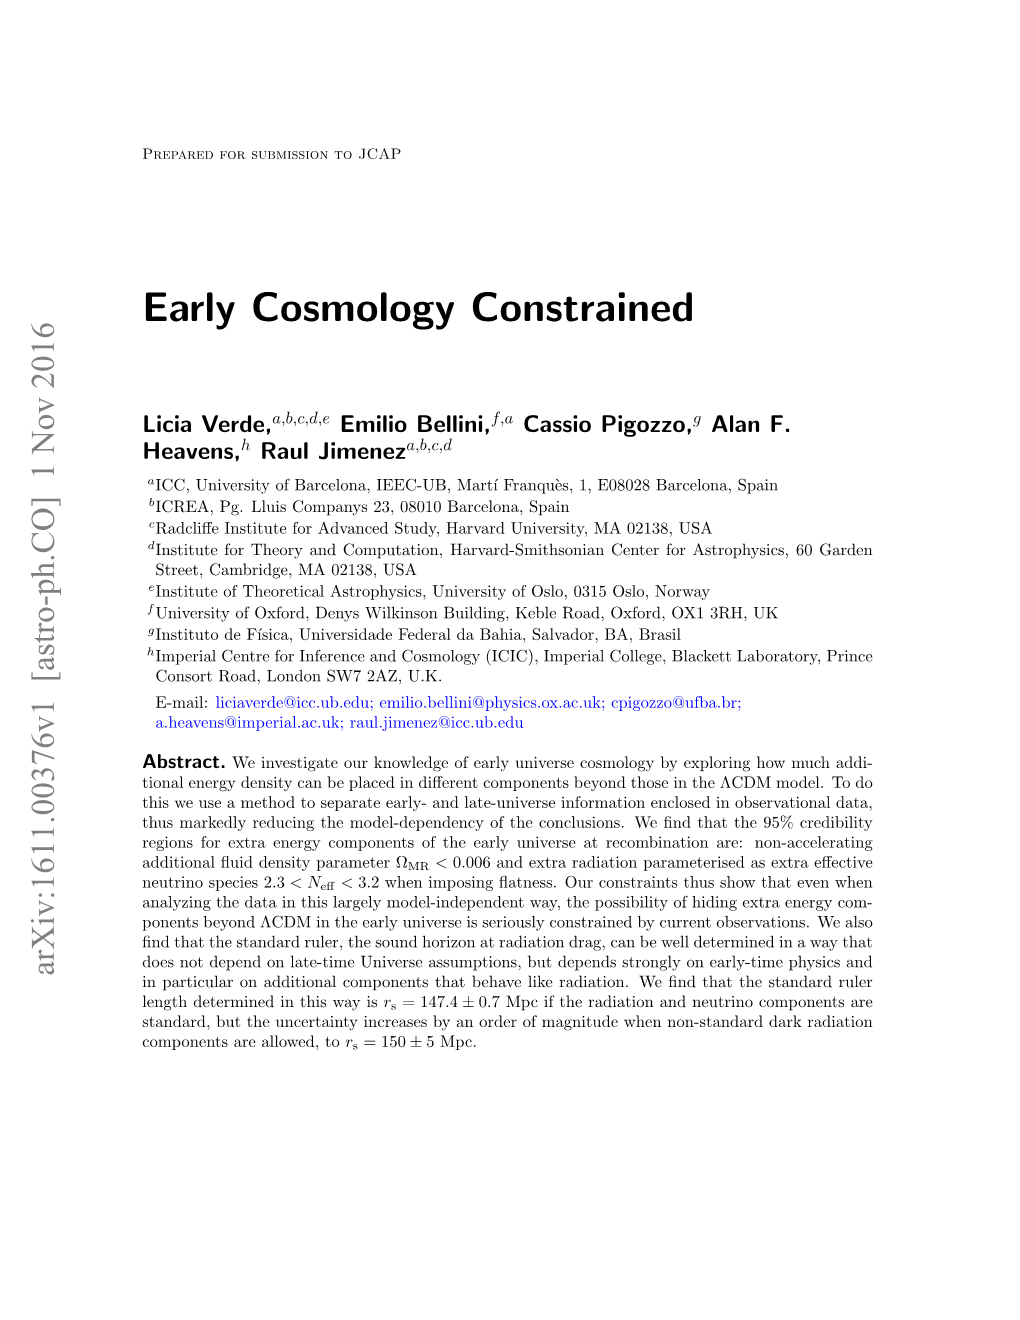 Early Cosmology Constrained